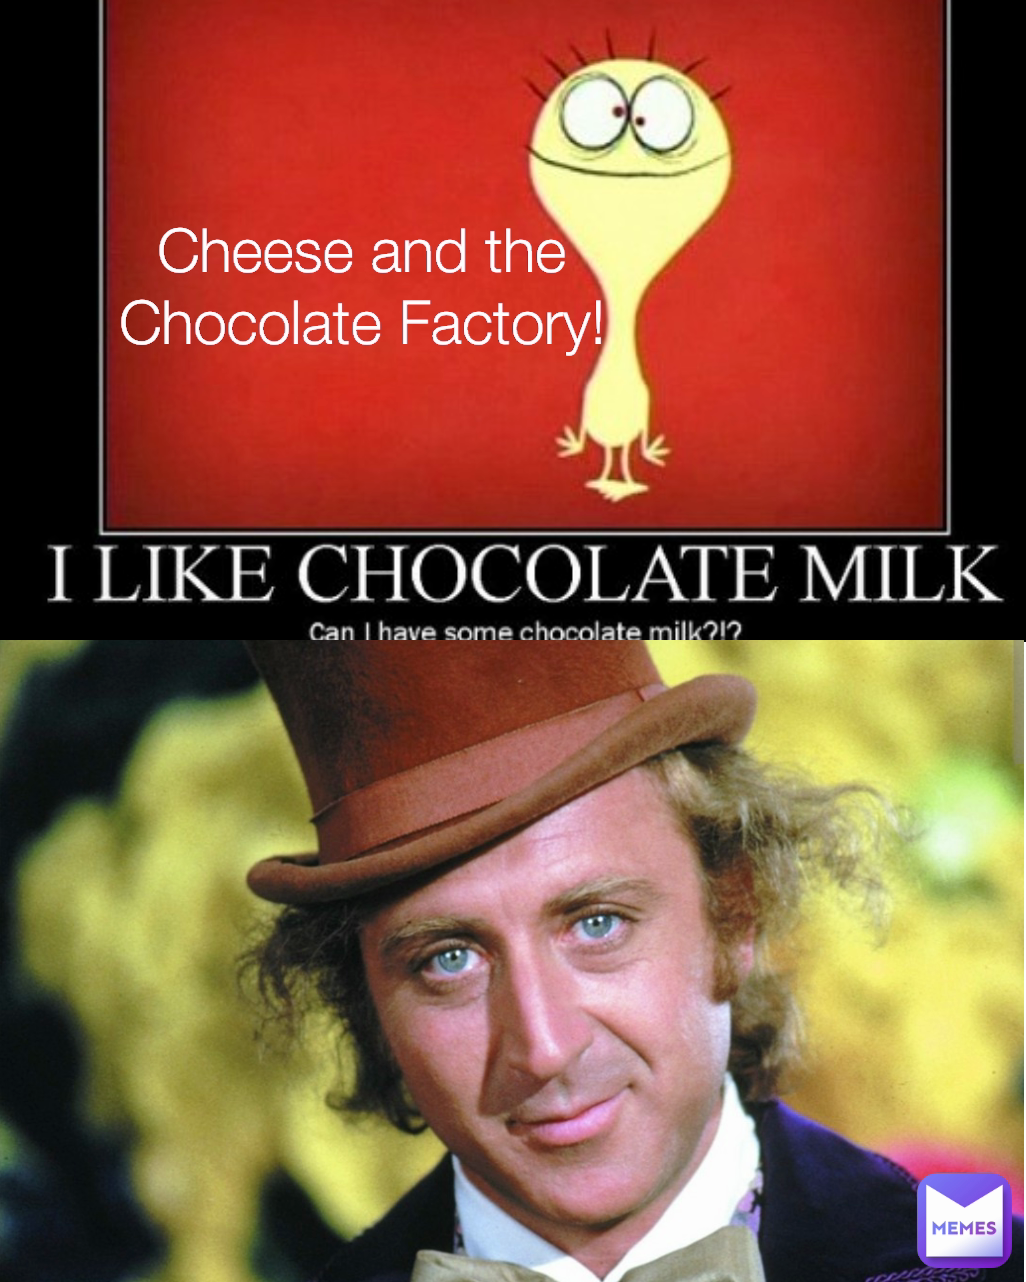 Cheese and the Chocolate Factory!